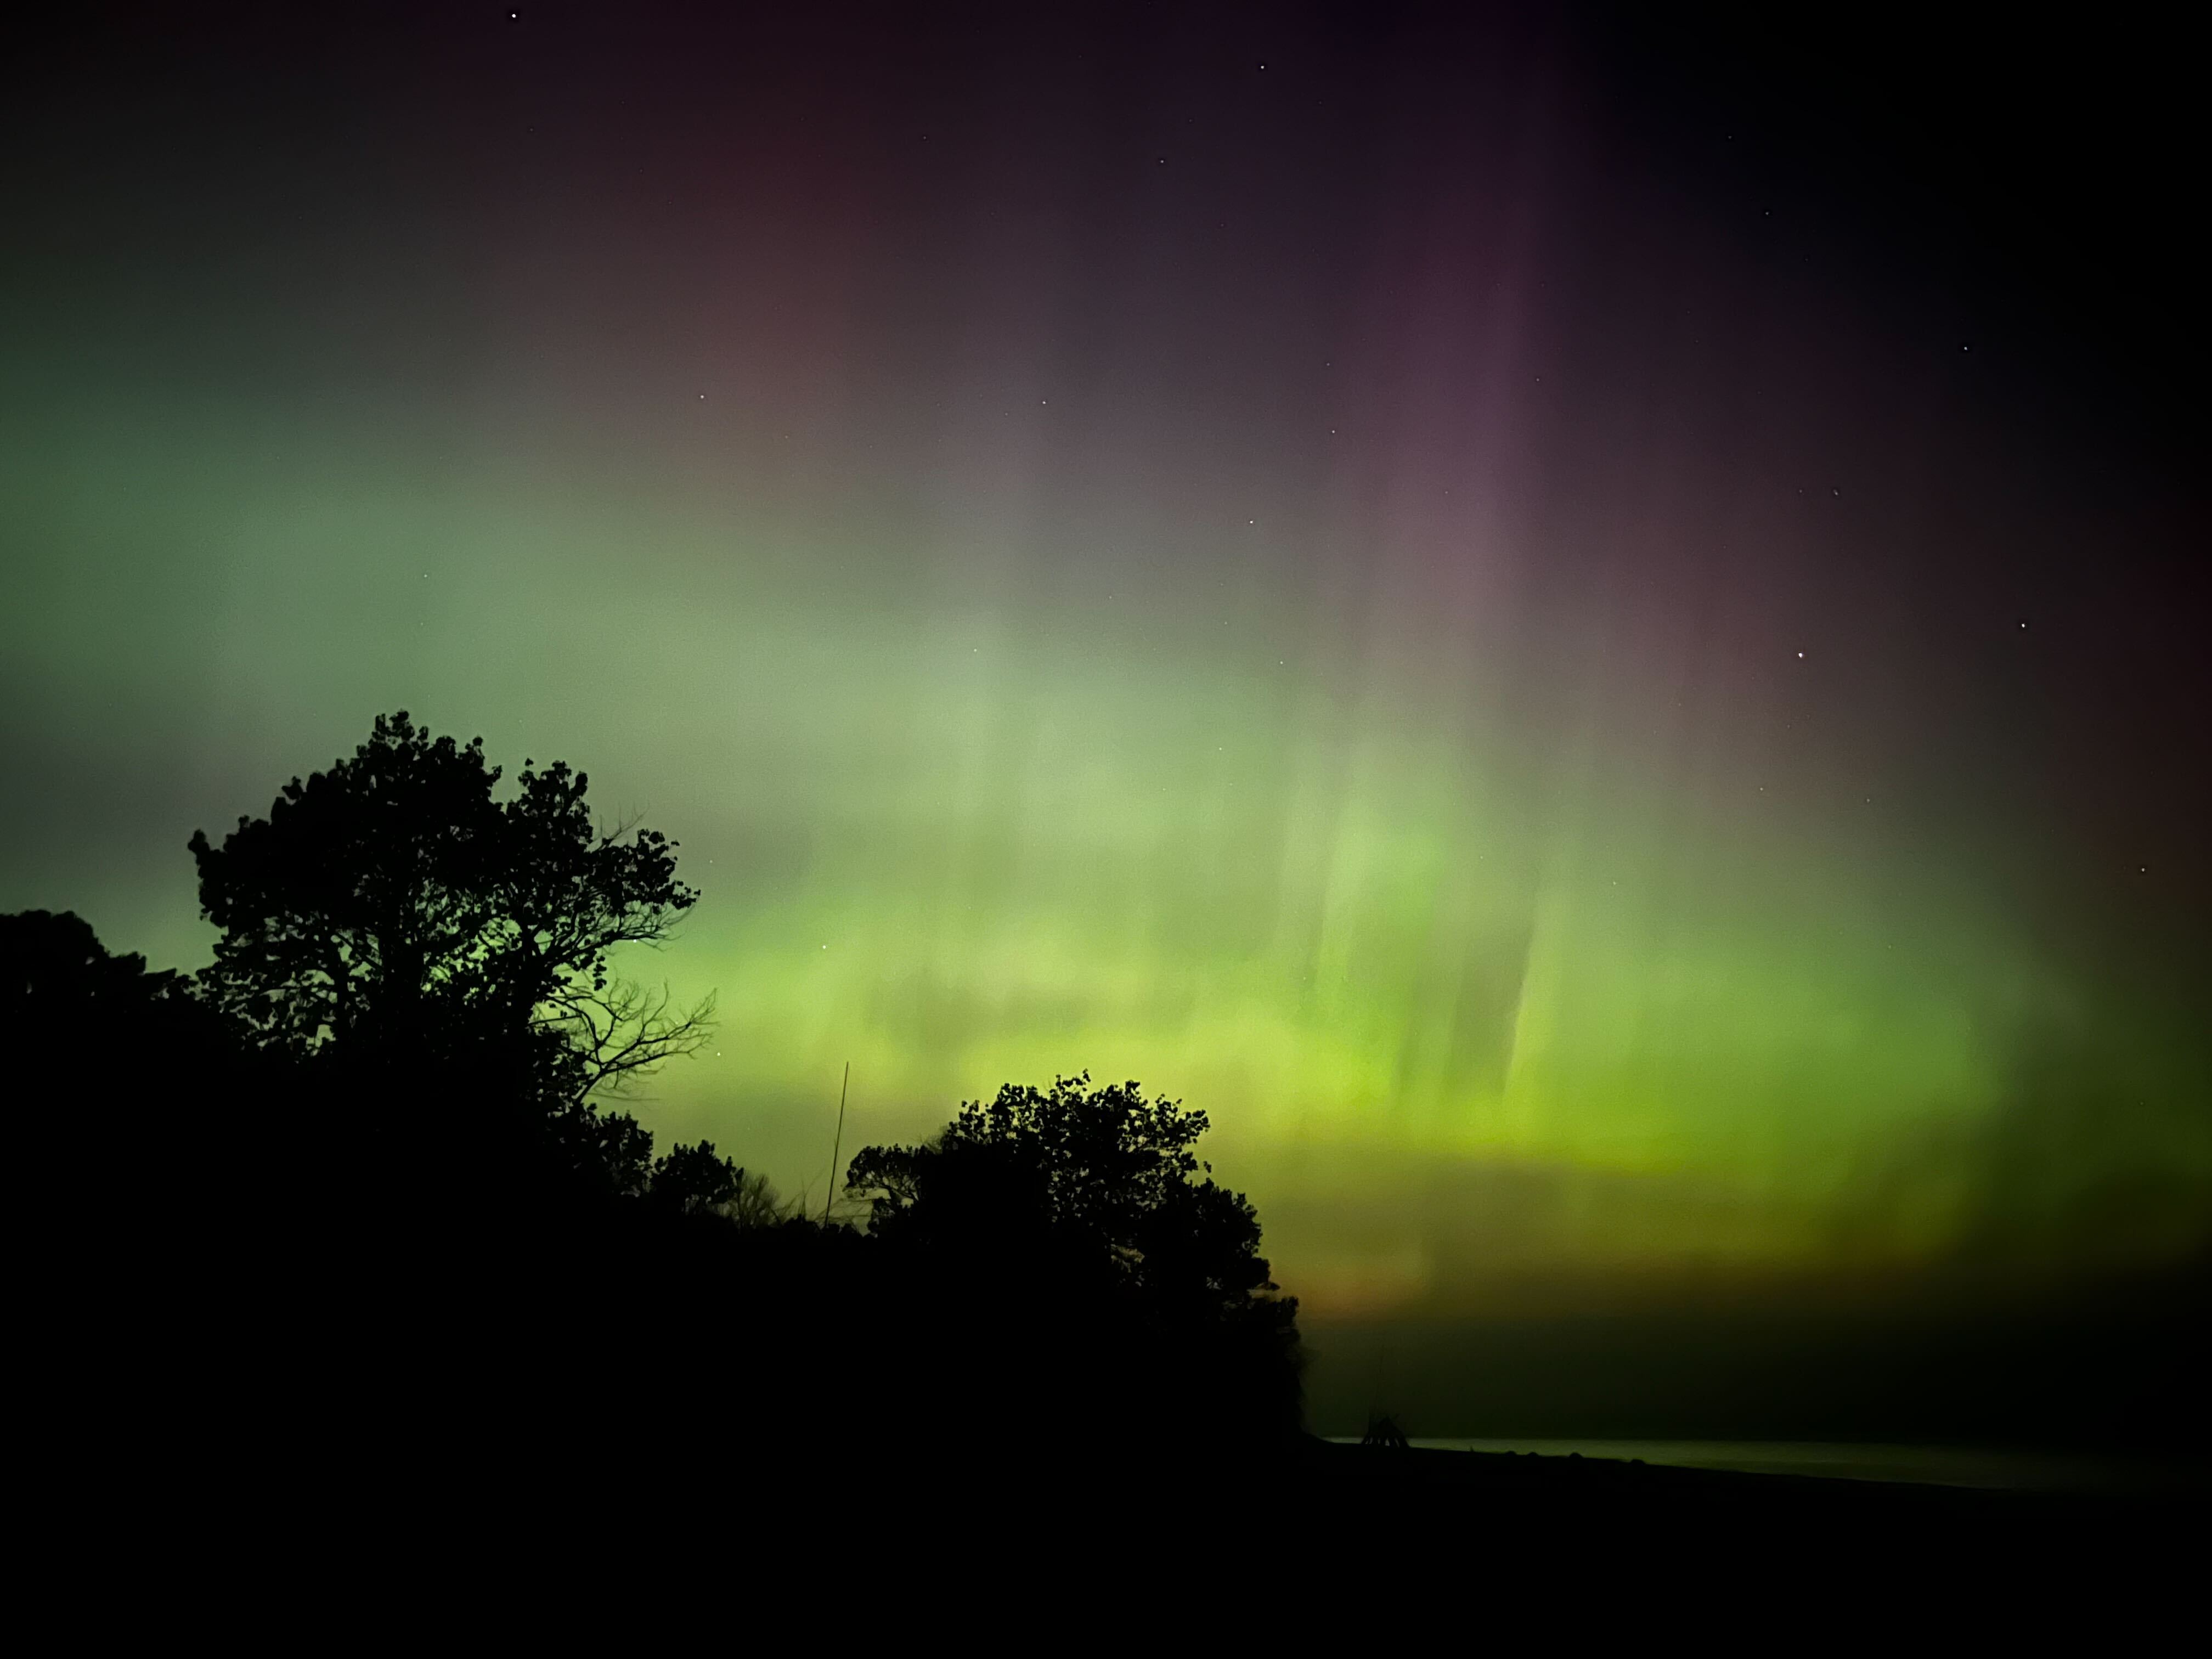 The northern lights glow serenely in the distance above trees in the foreground at Kohler-Andrae State Park in Wisconsin.